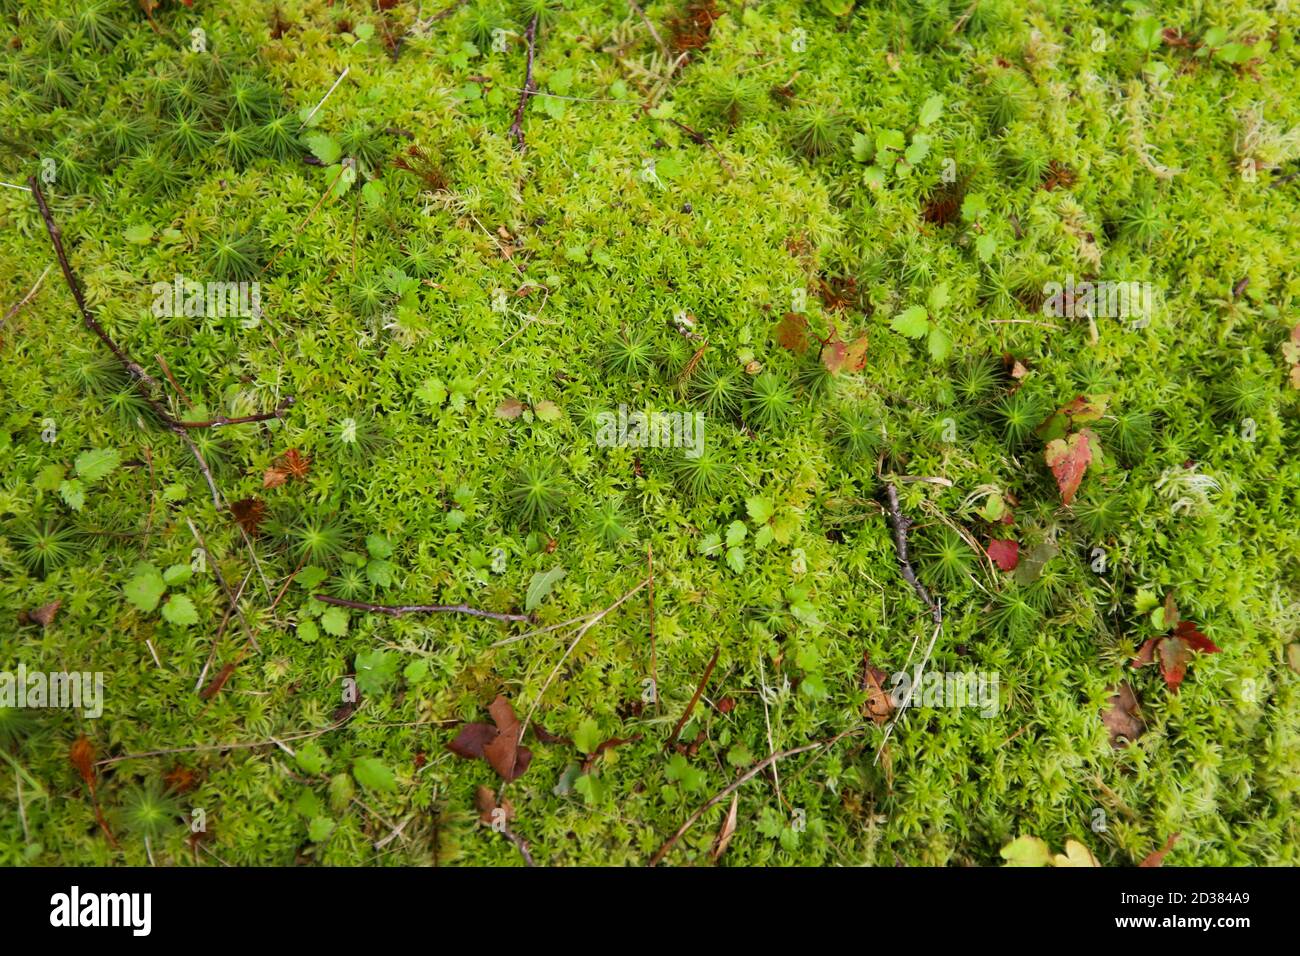 Star Moss, Tortula ruralis texture with leaves and branches Stock Photo